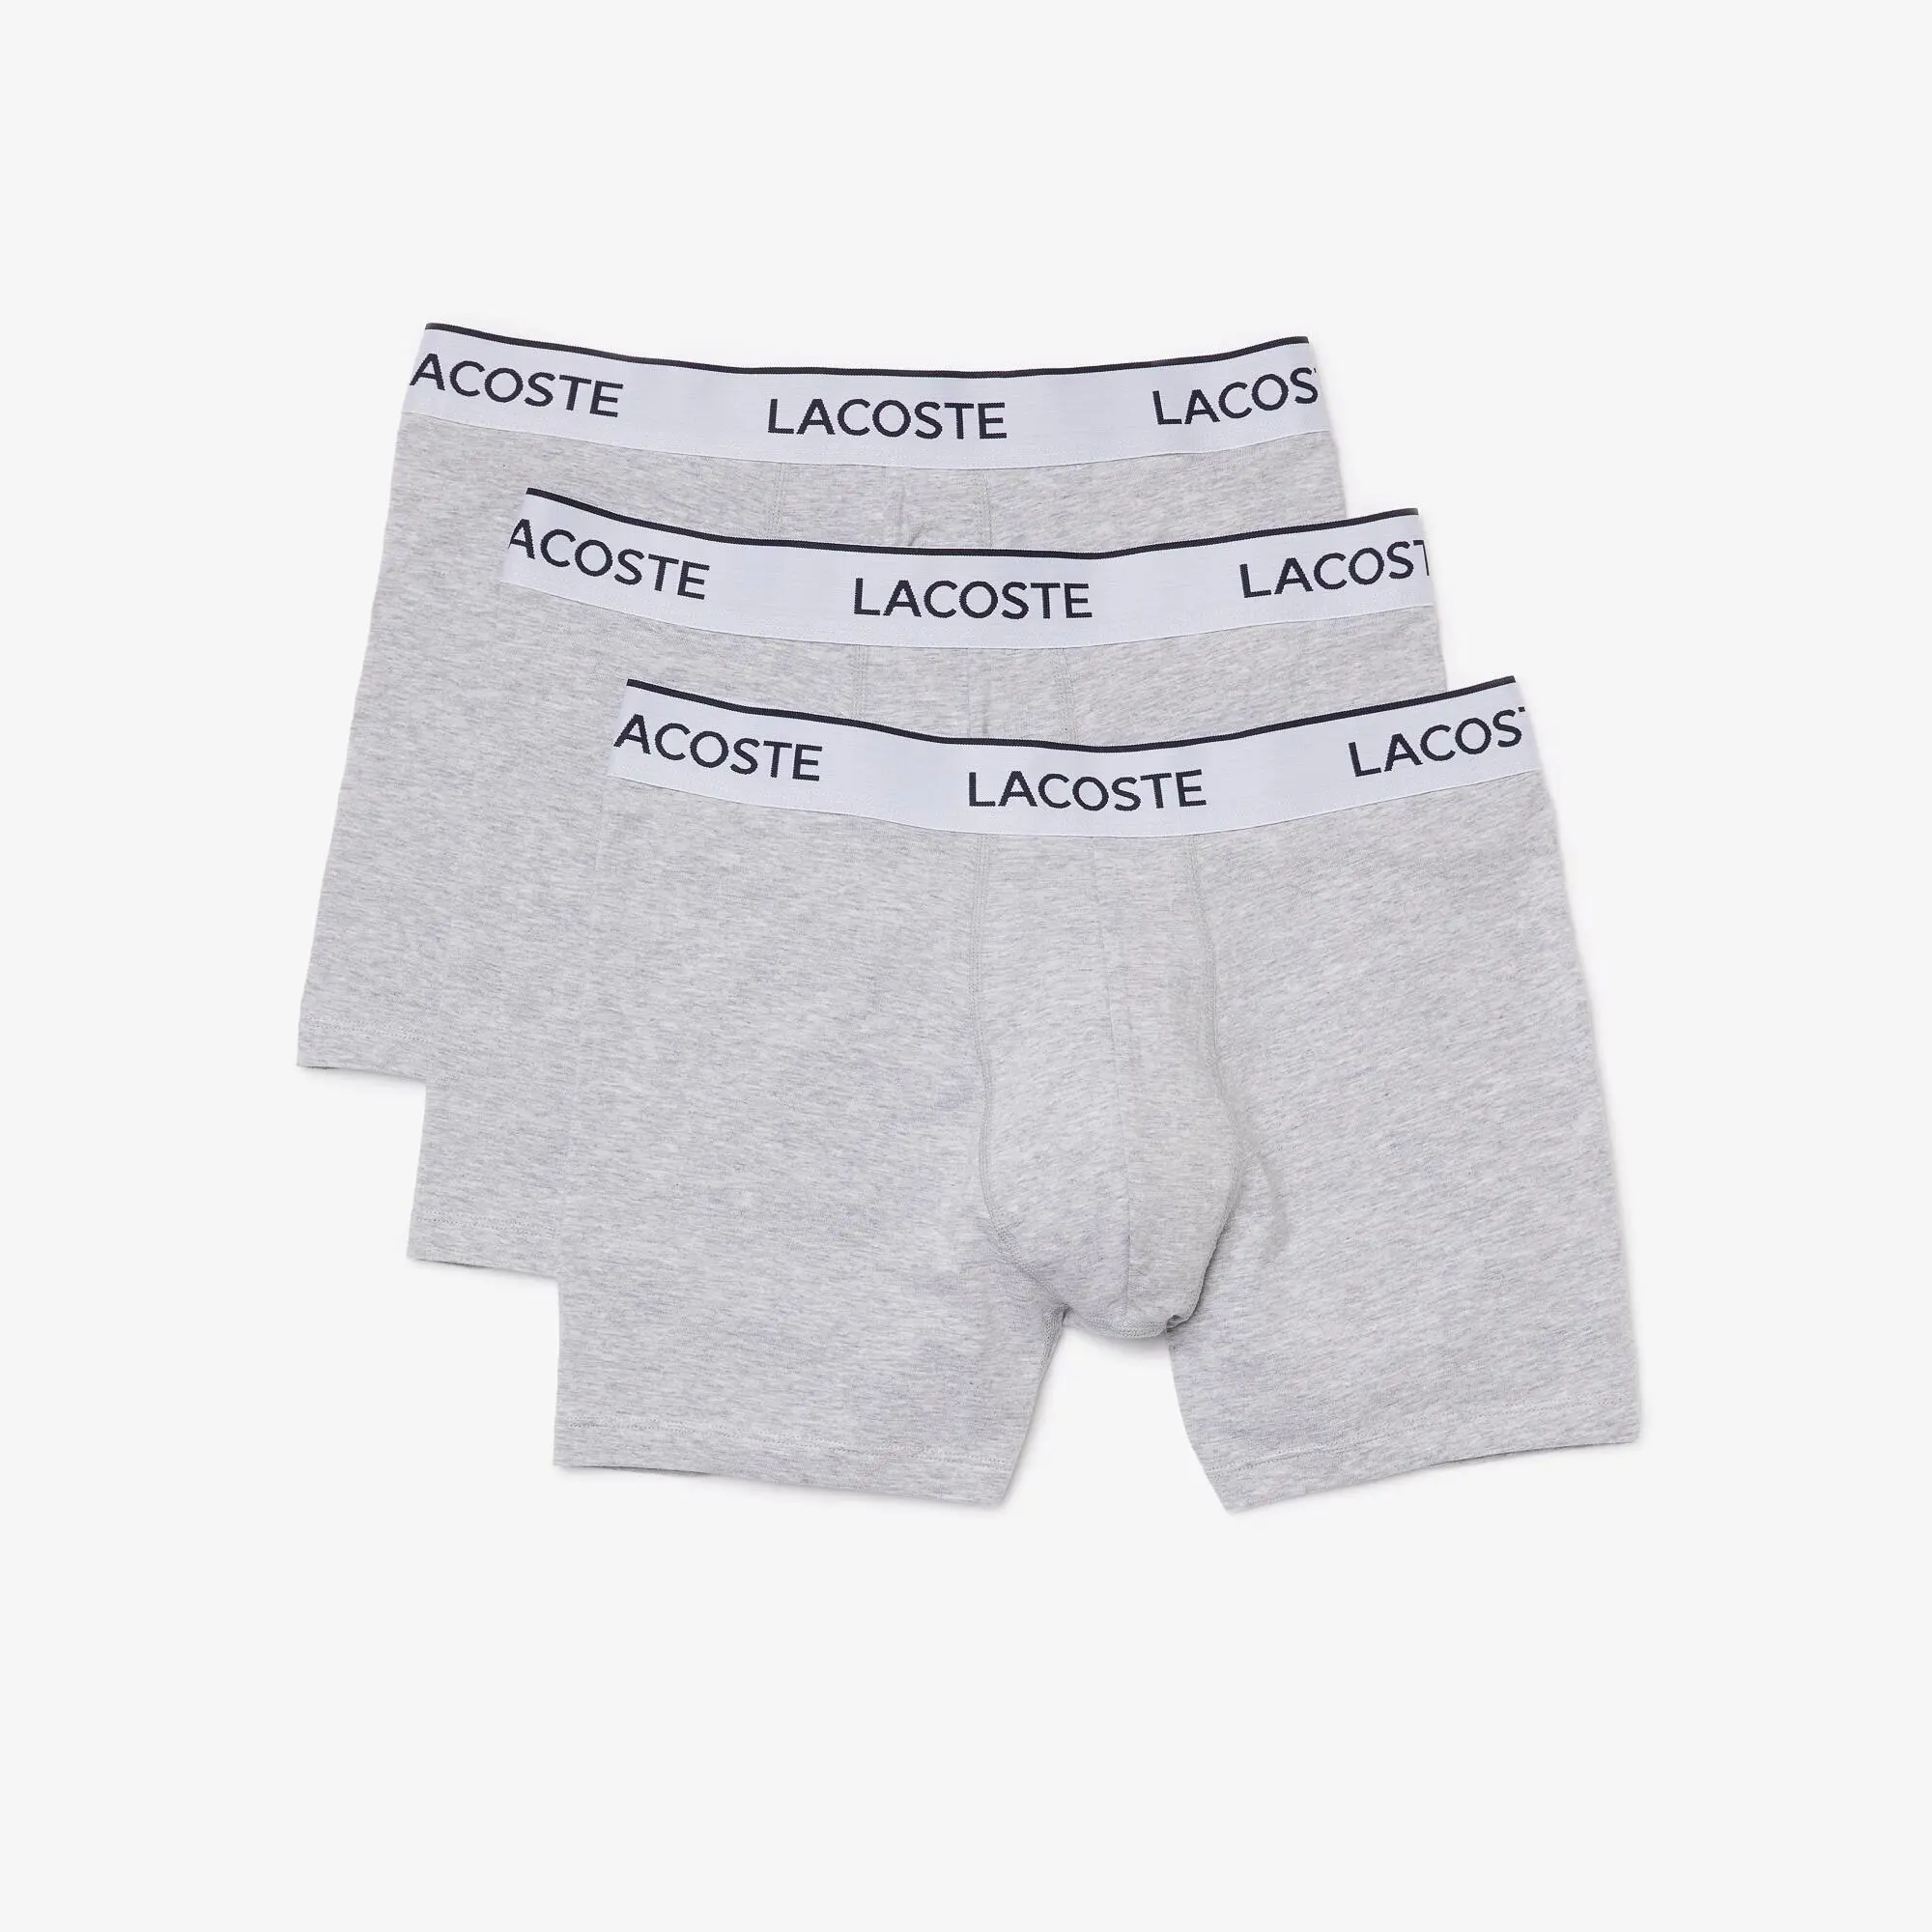 Lacoste Men's 3-Pack Branded Striped Boxers. 1